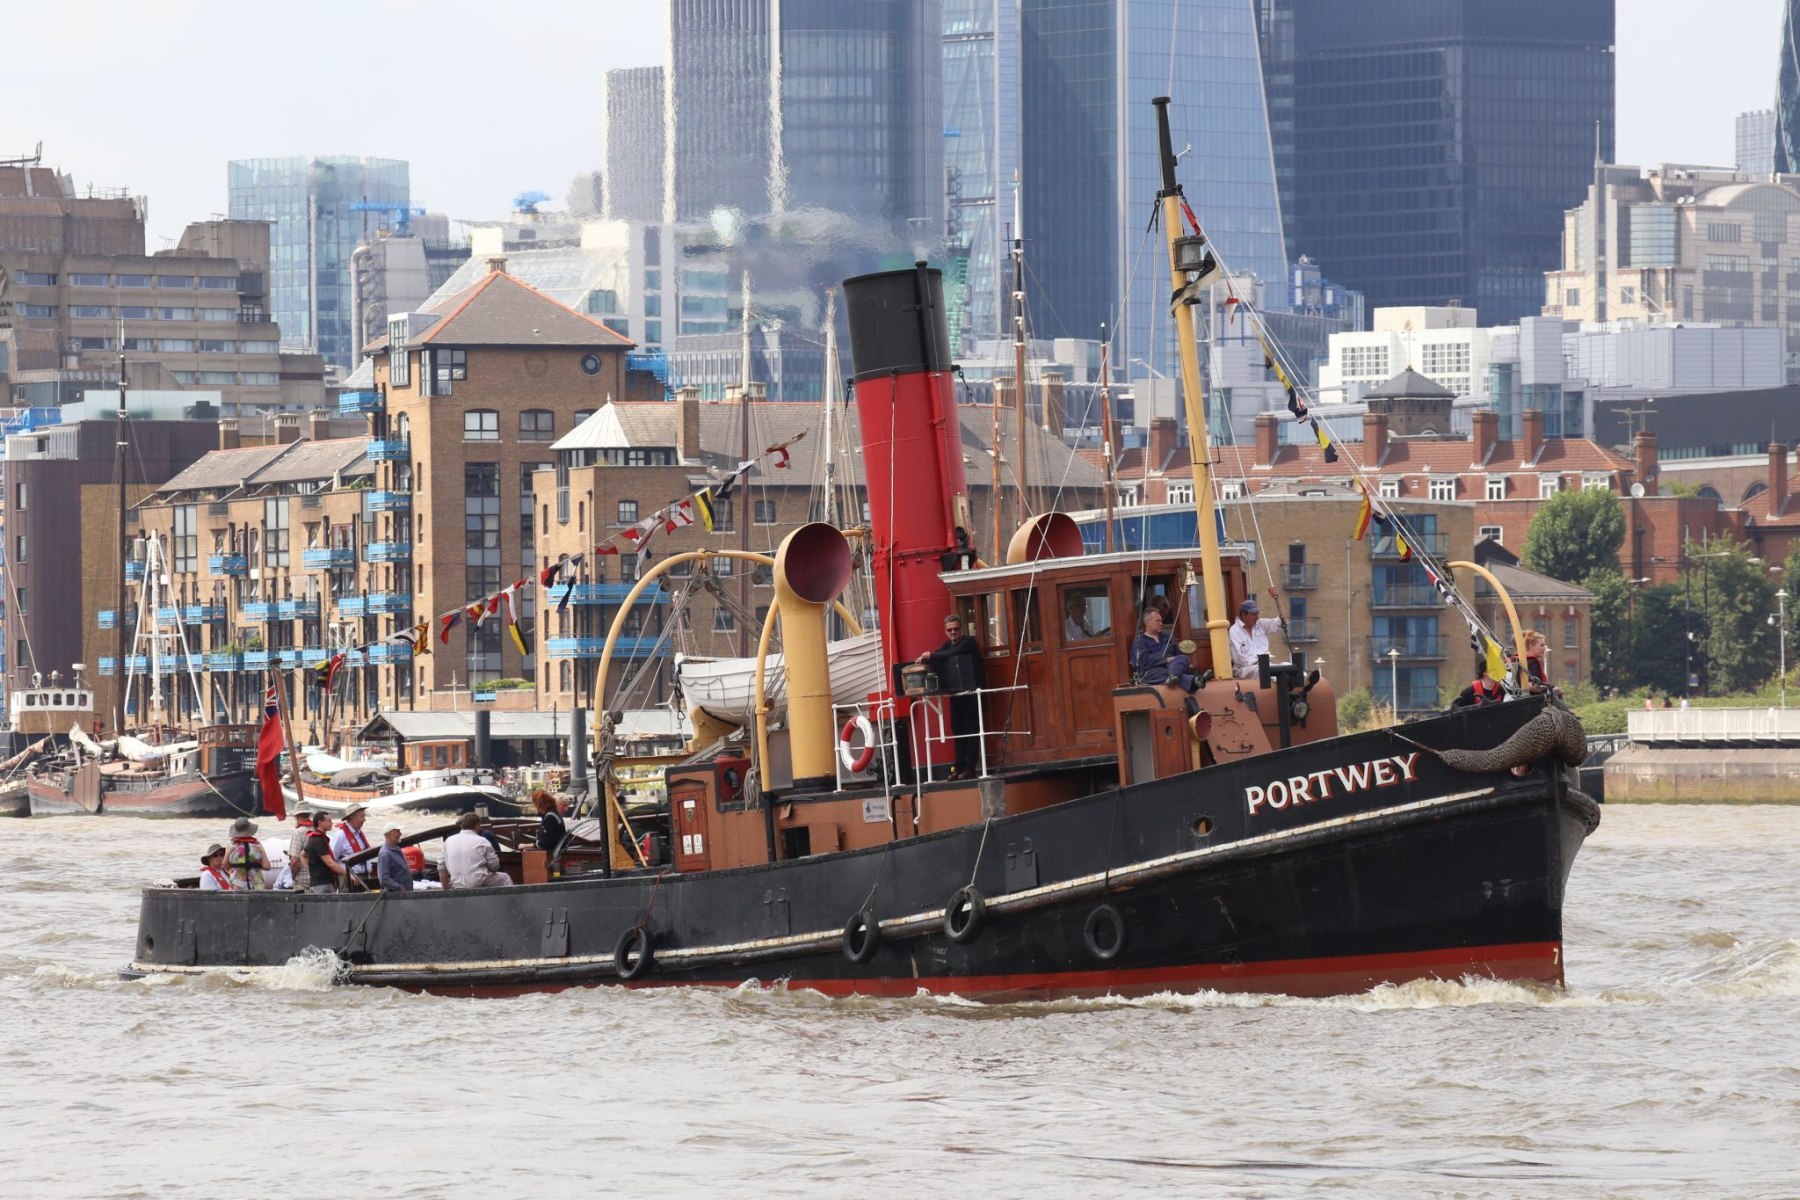 Steam Tug Portwey passes Wapping on the River Thames, 14-Jul-2018